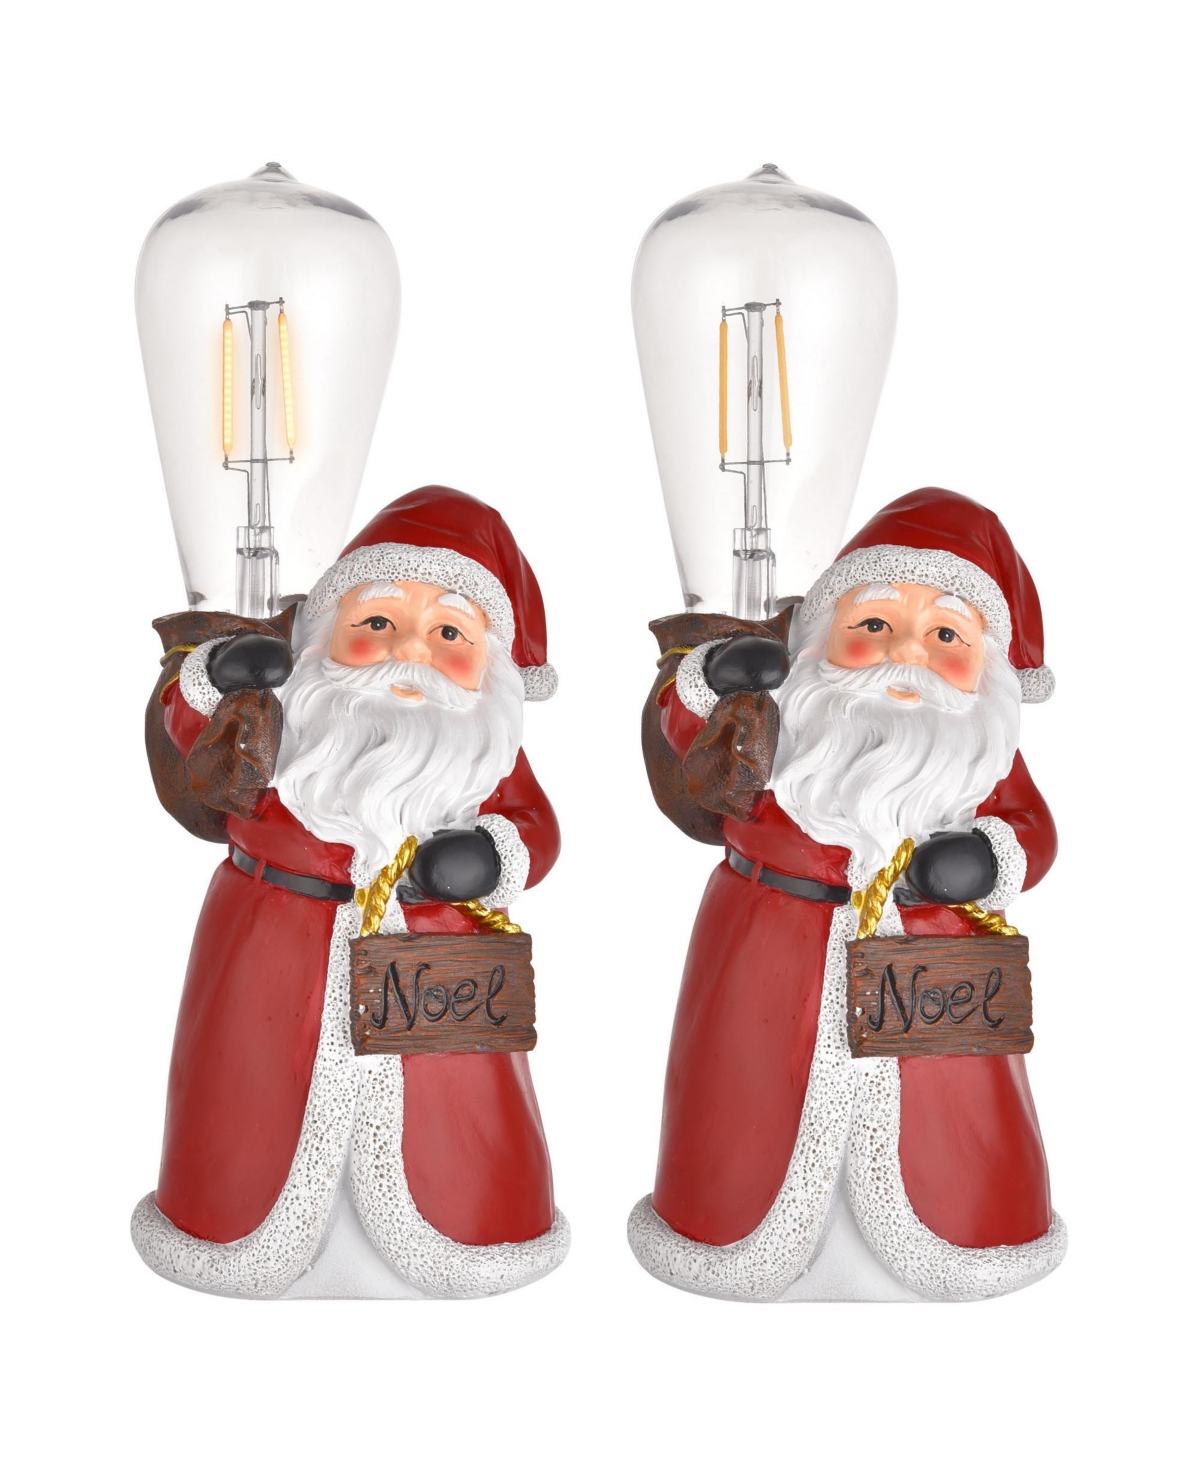 Yescom Resin Santa Claus Light Christmas Party Tabletop Decoration With Led Lamp 2 Pack In Pattern